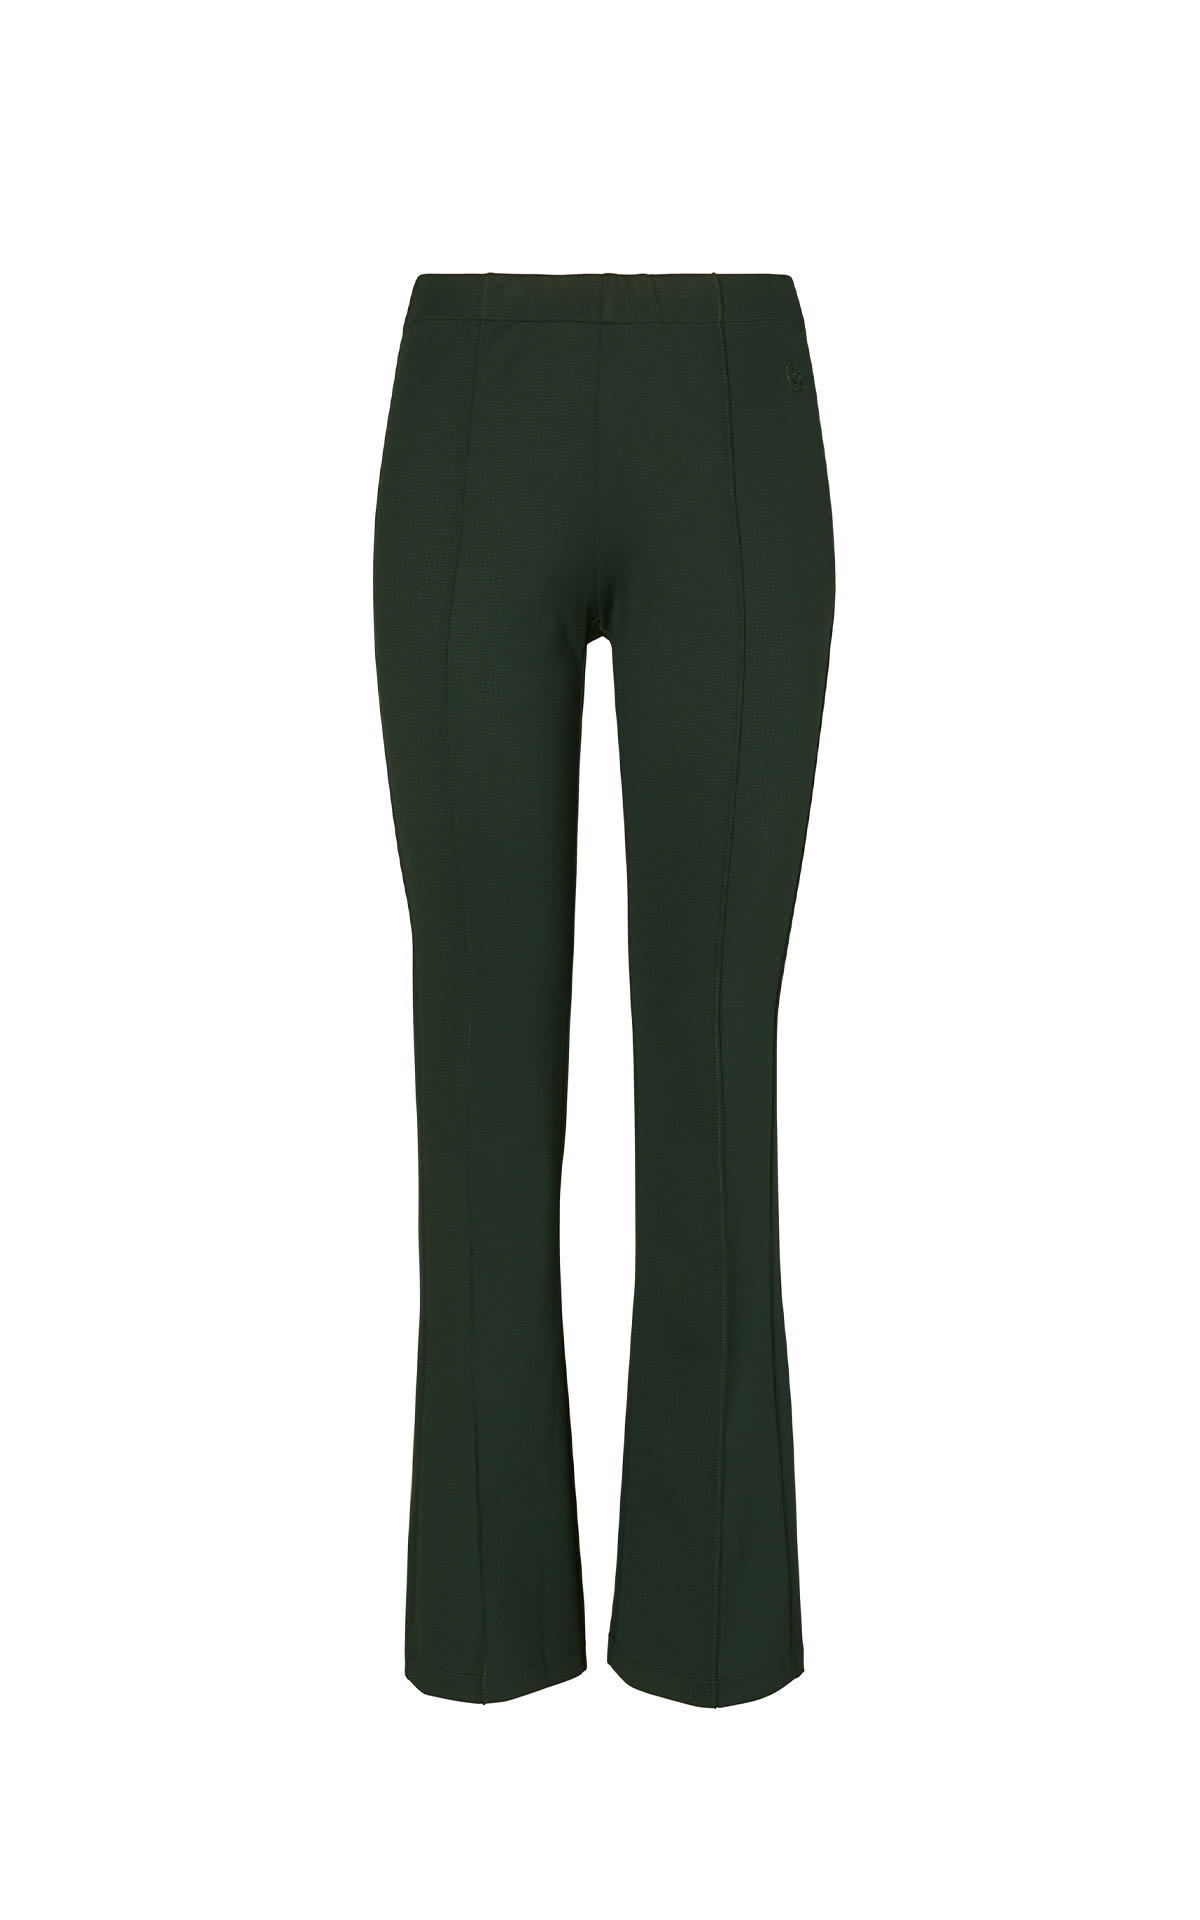 Tory Burch Double knit track flare pants from Bicester Village